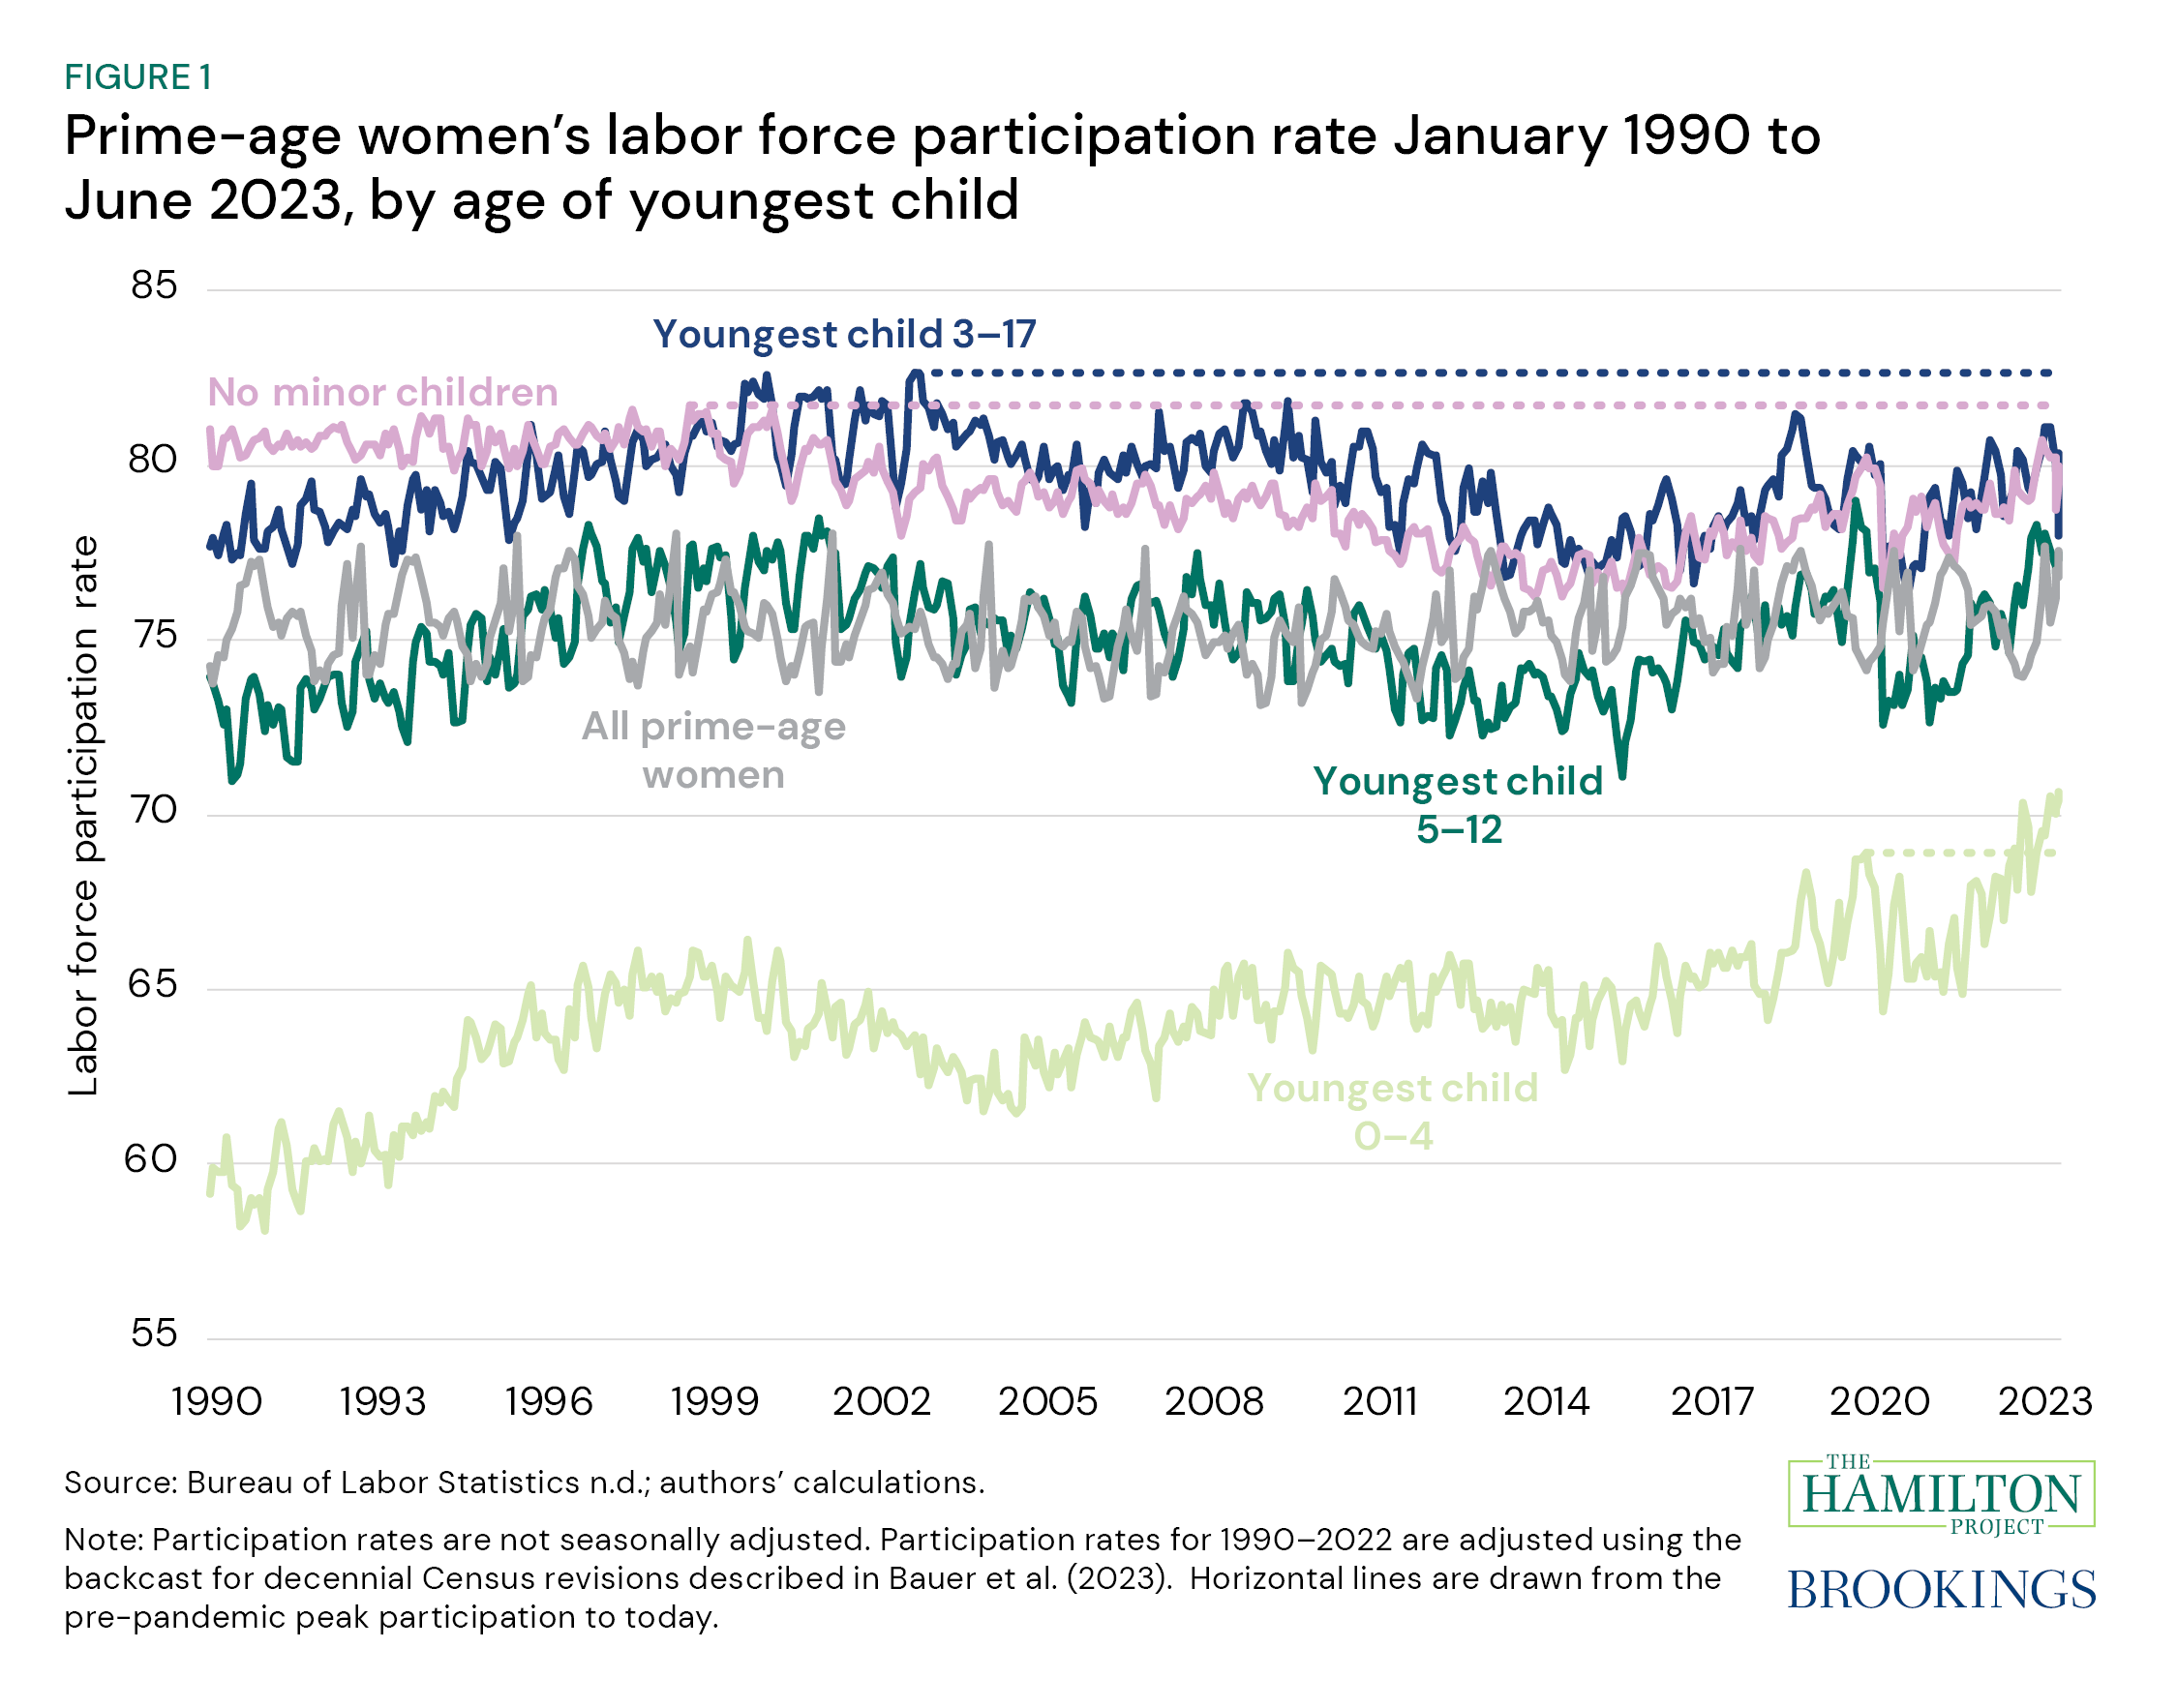 Figure 1. Prime-age women's labor force participation rate January 1990 to June 2023, by age of youngest child